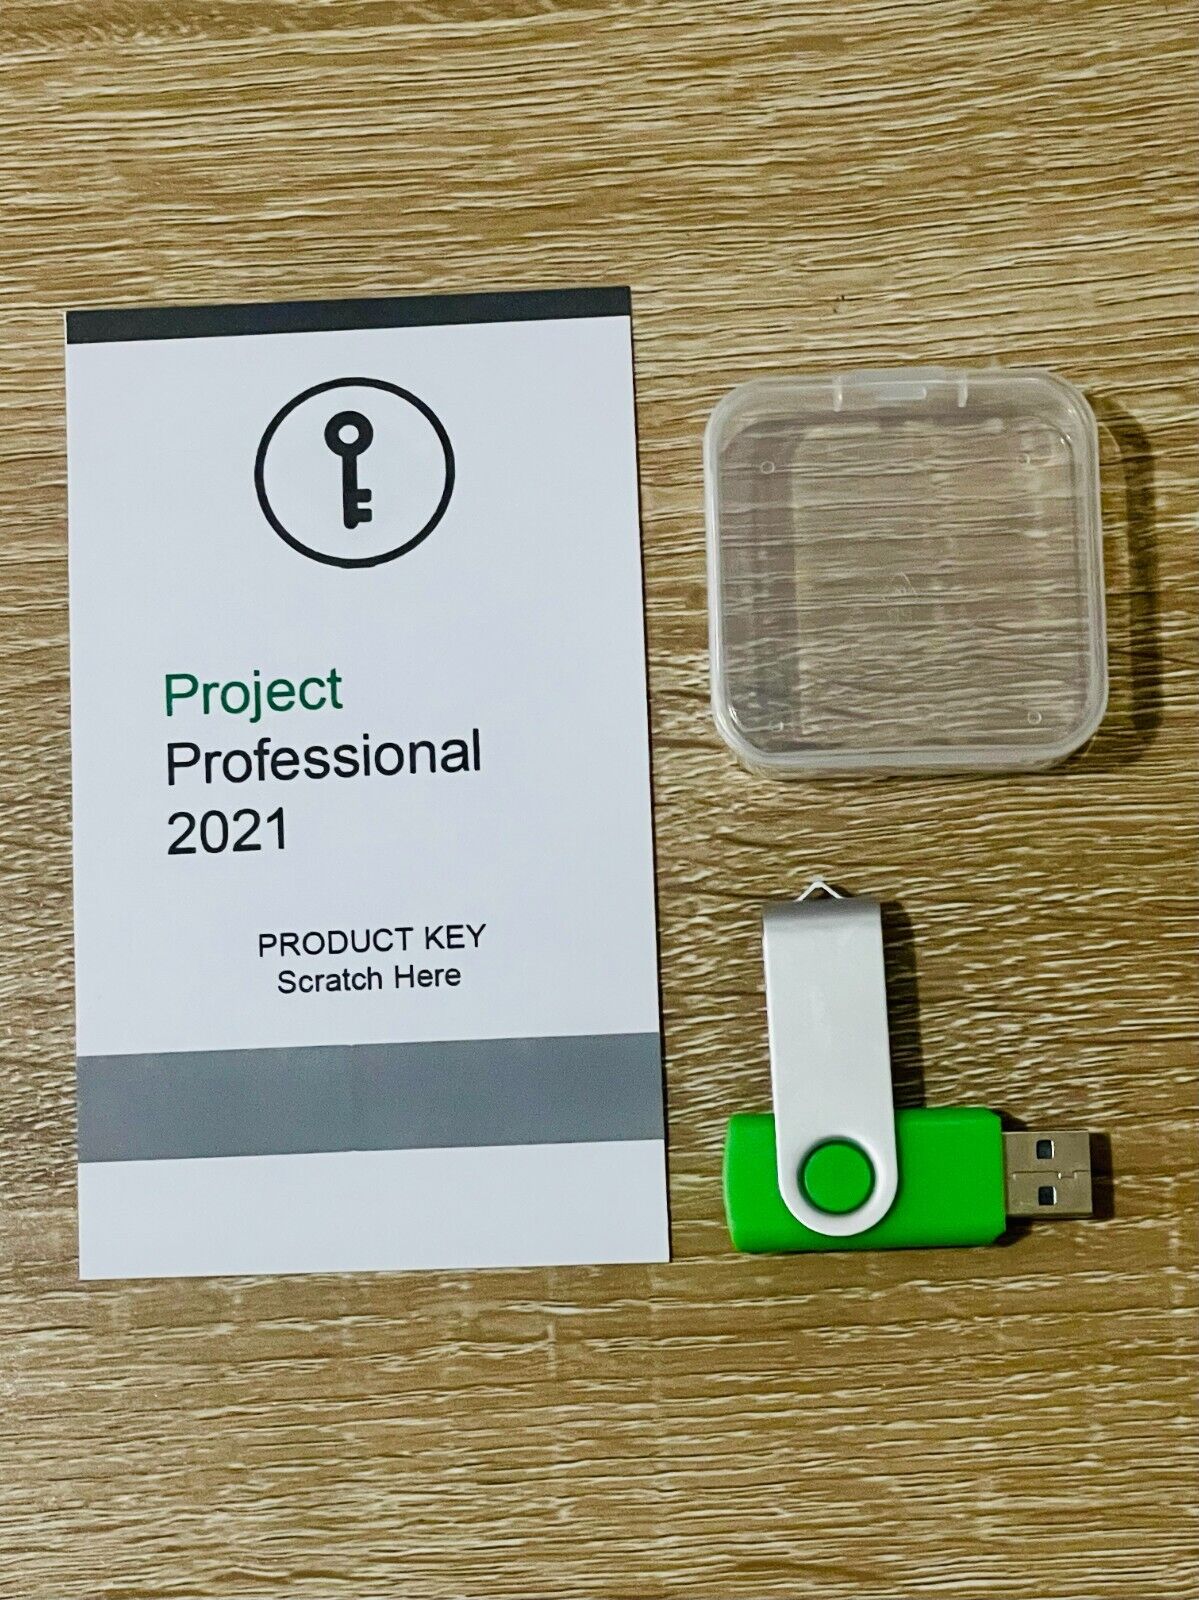 MS Project 2021 - 2 PC Full Version with USB Flash